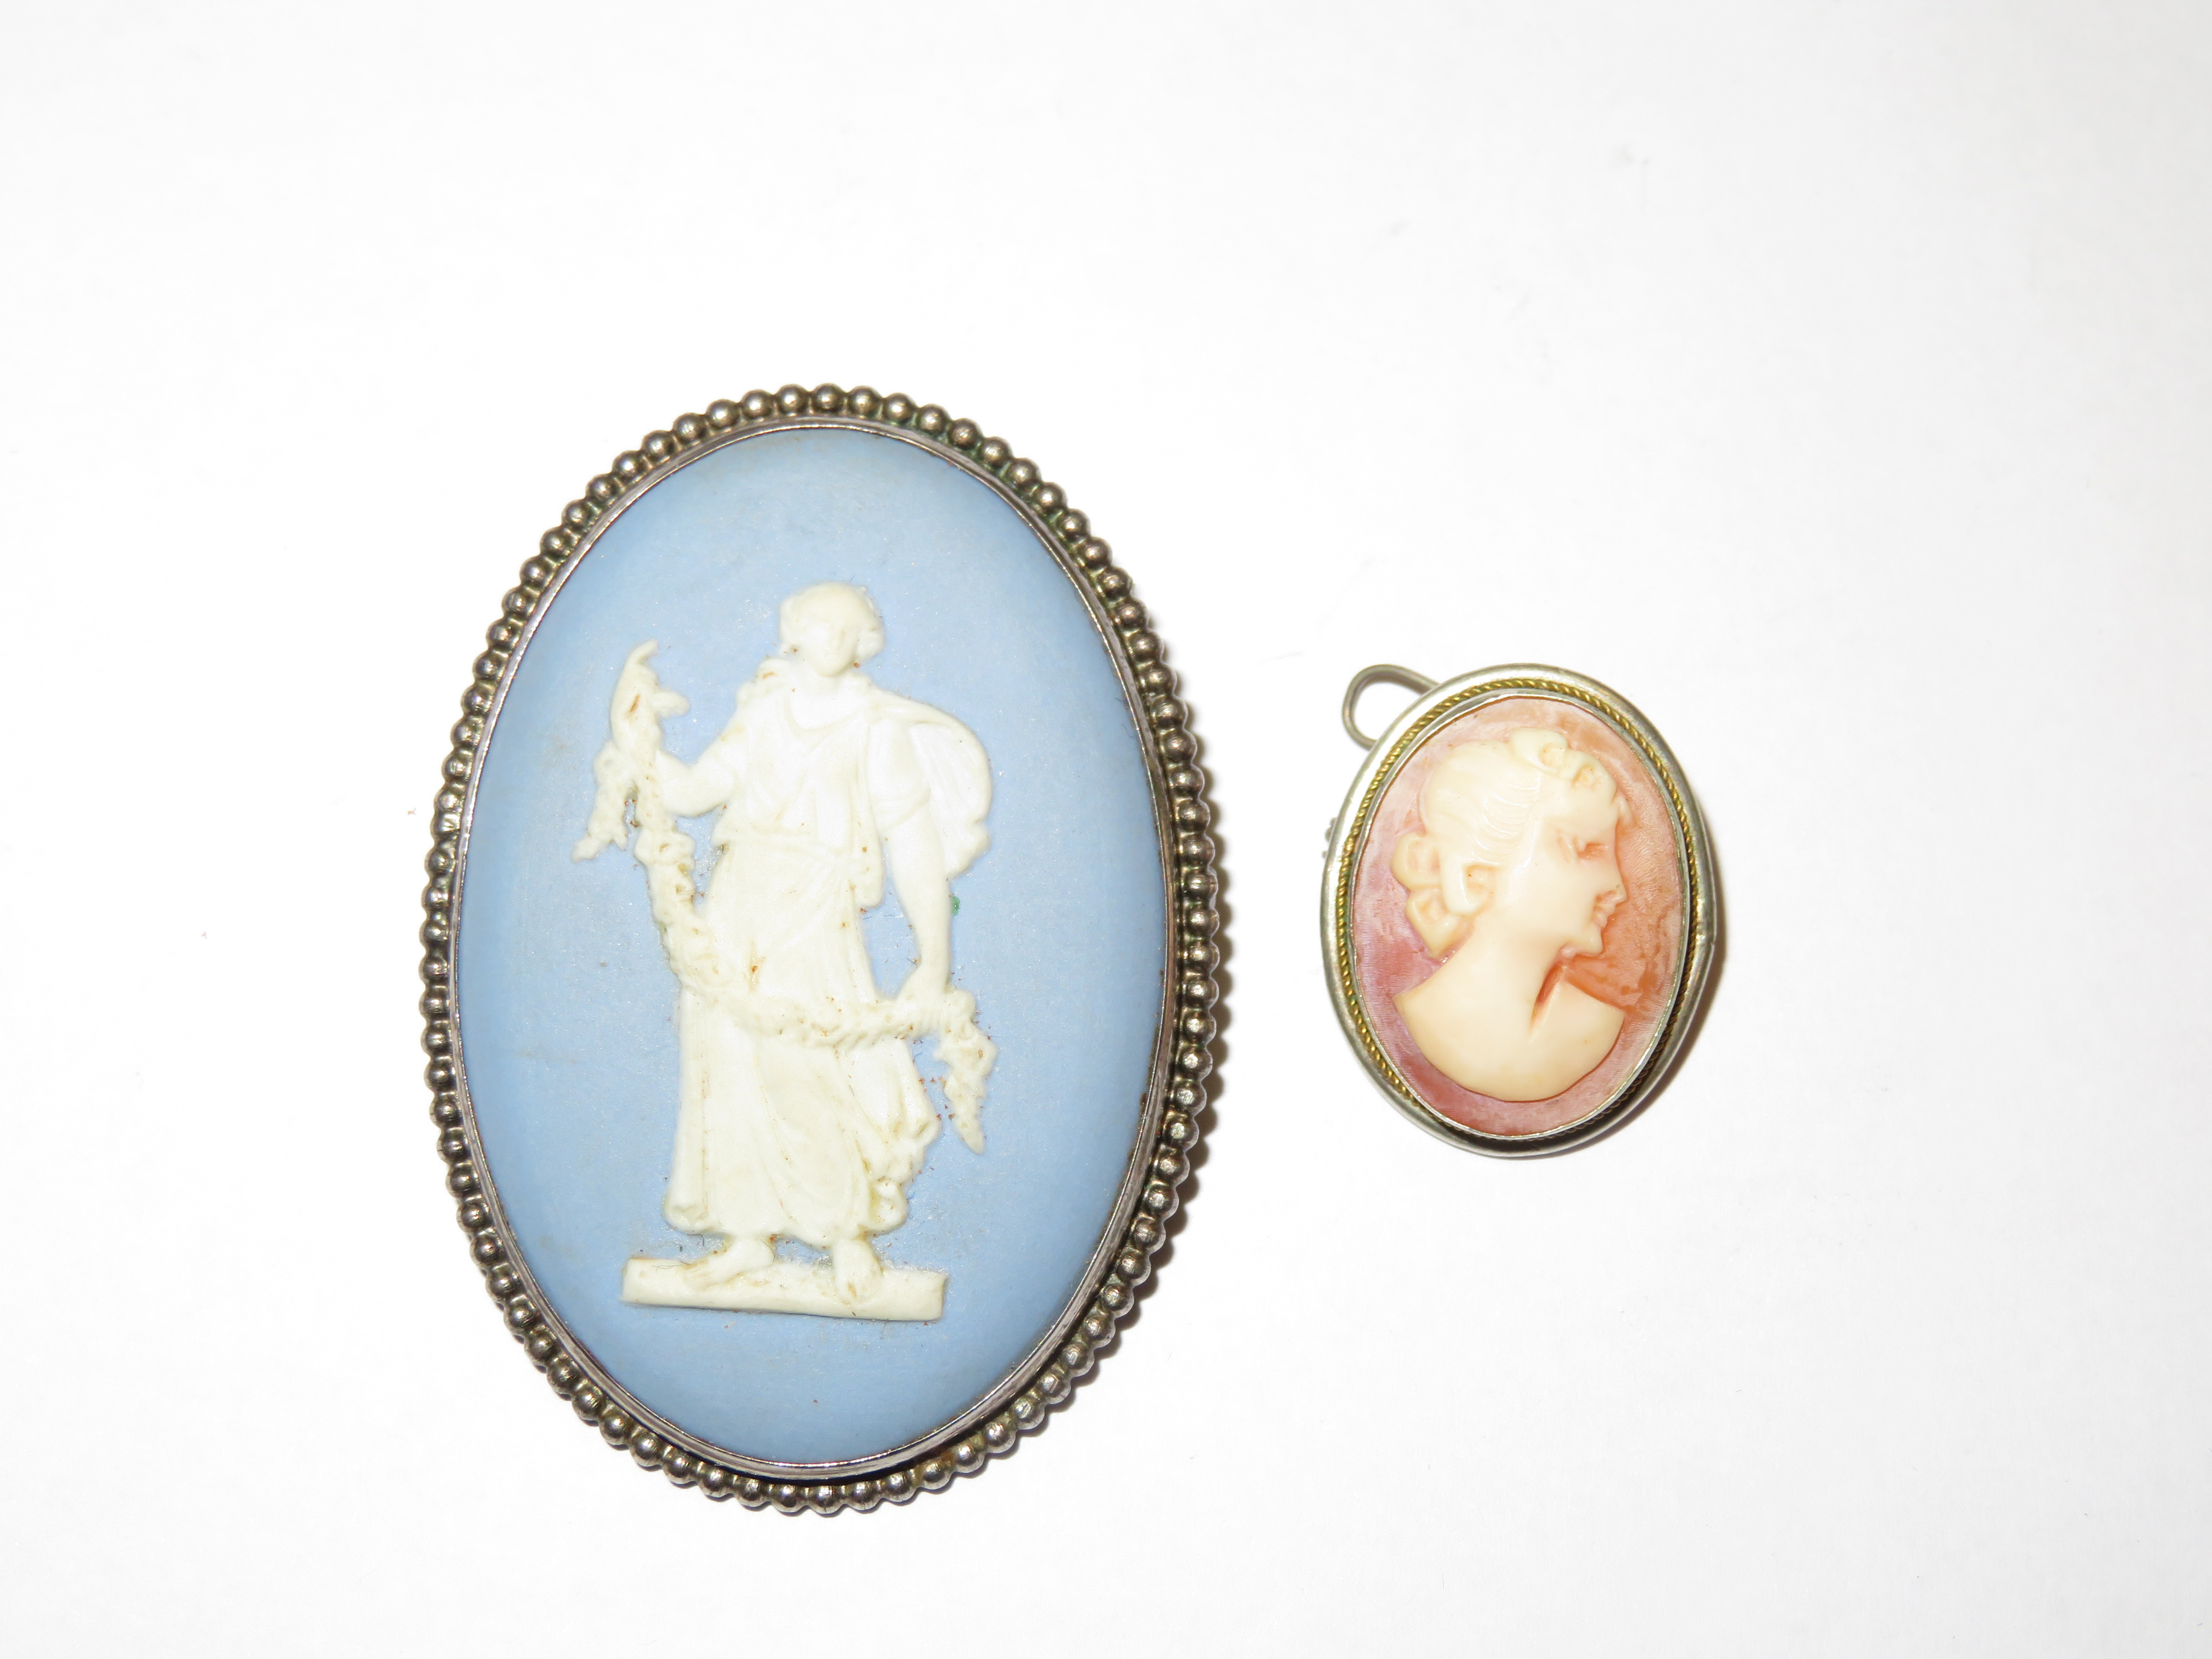 Wedgwood jasper ware pin brooch together with a ca